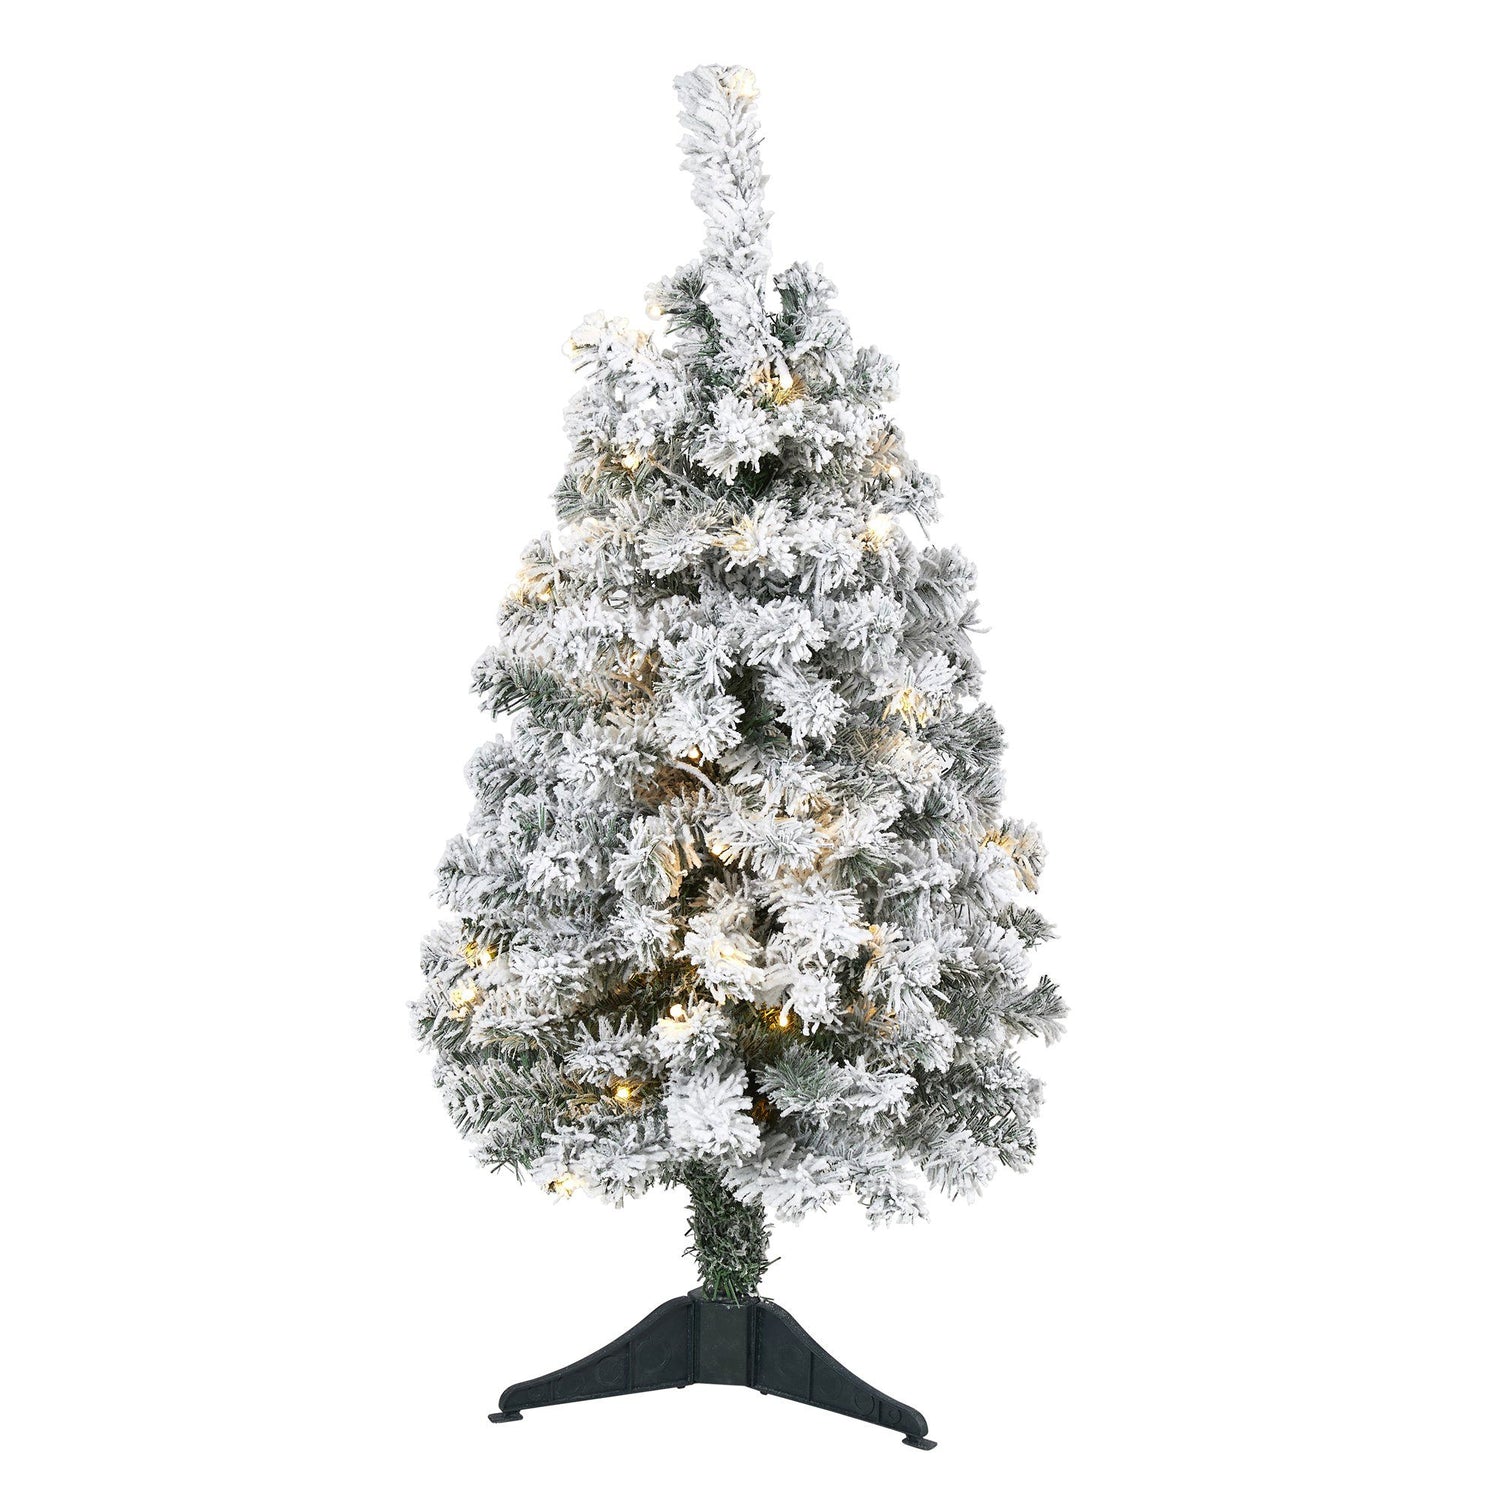 3' Flocked Rock Springs Spruce Artificial Christmas Tree with 50 Clear LED Lights